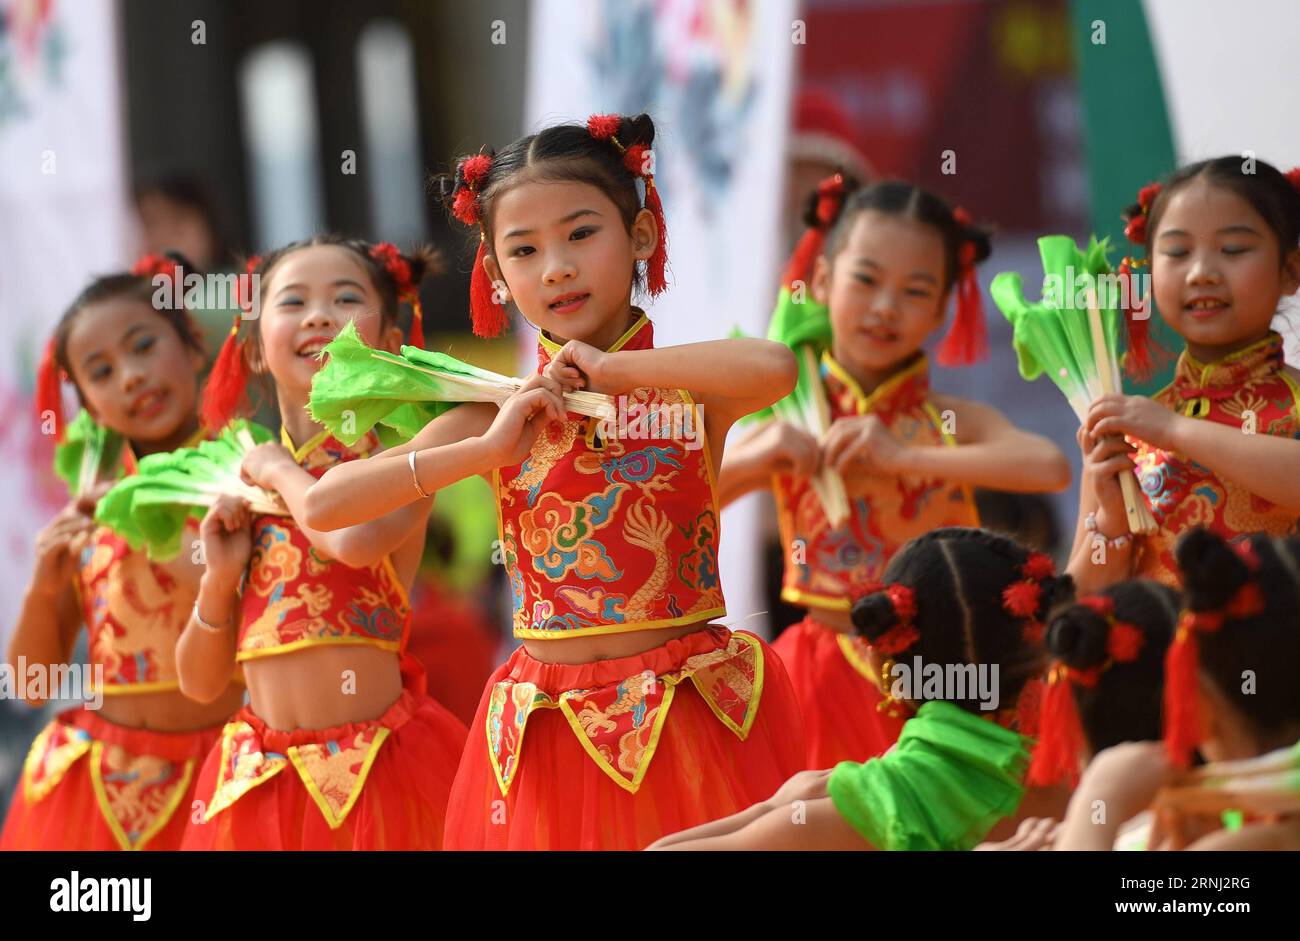 (161228) -- RONGAN, Dec. 28, 2016 -- Children perform in Chang an Township in Rong an County, south China s Guangxi Zhuang Automonous Region, Dec. 28, 2016. A celebration was held for the harvest of kumquat fruit here on Wednesday. ) (zyd) CHINA-GUANGXI-KUMQUAT HARVEST-CELEBRATION (CN) LuxBo an PUBLICATIONxNOTxINxCHN   Rongan DEC 28 2016 Children perform in Chang to Township in Rong to County South China S Guangxi Zhuang  Region DEC 28 2016 a Celebration what Hero for The Harvest of Kumquat Fruit Here ON Wednesday ZYD China Guangxi Kumquat Harvest Celebration CN LuxBo to PUBLICATIONxNOTxINxCHN Stock Photo